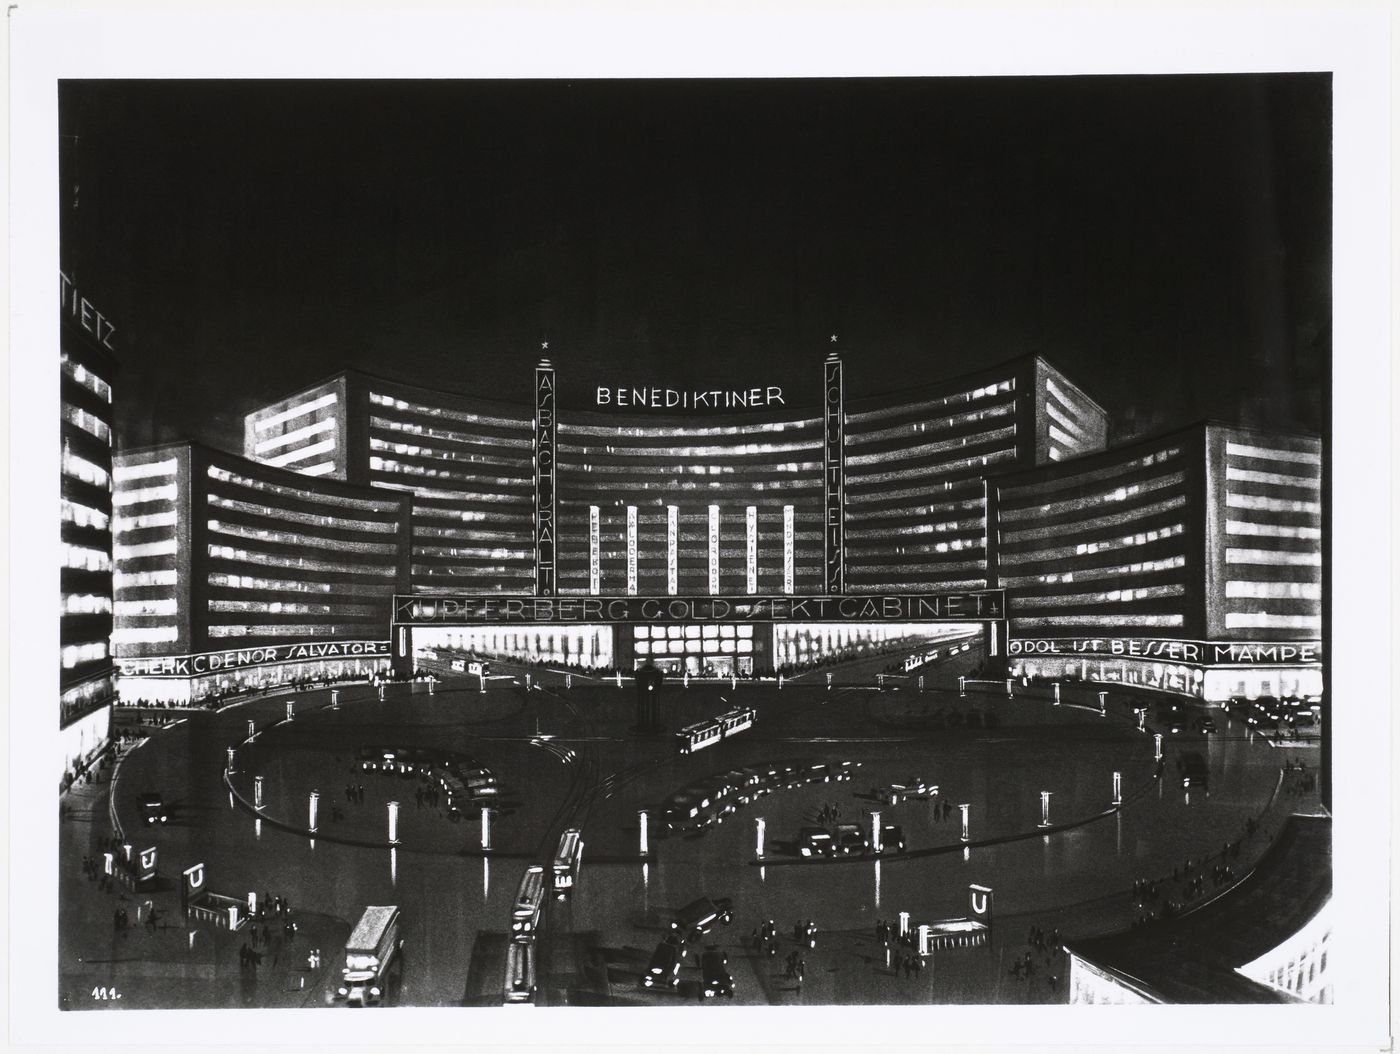 Photograph of a perspective drawing by Mebes & Emmerich for the Alexanderplatz competition, Berlin